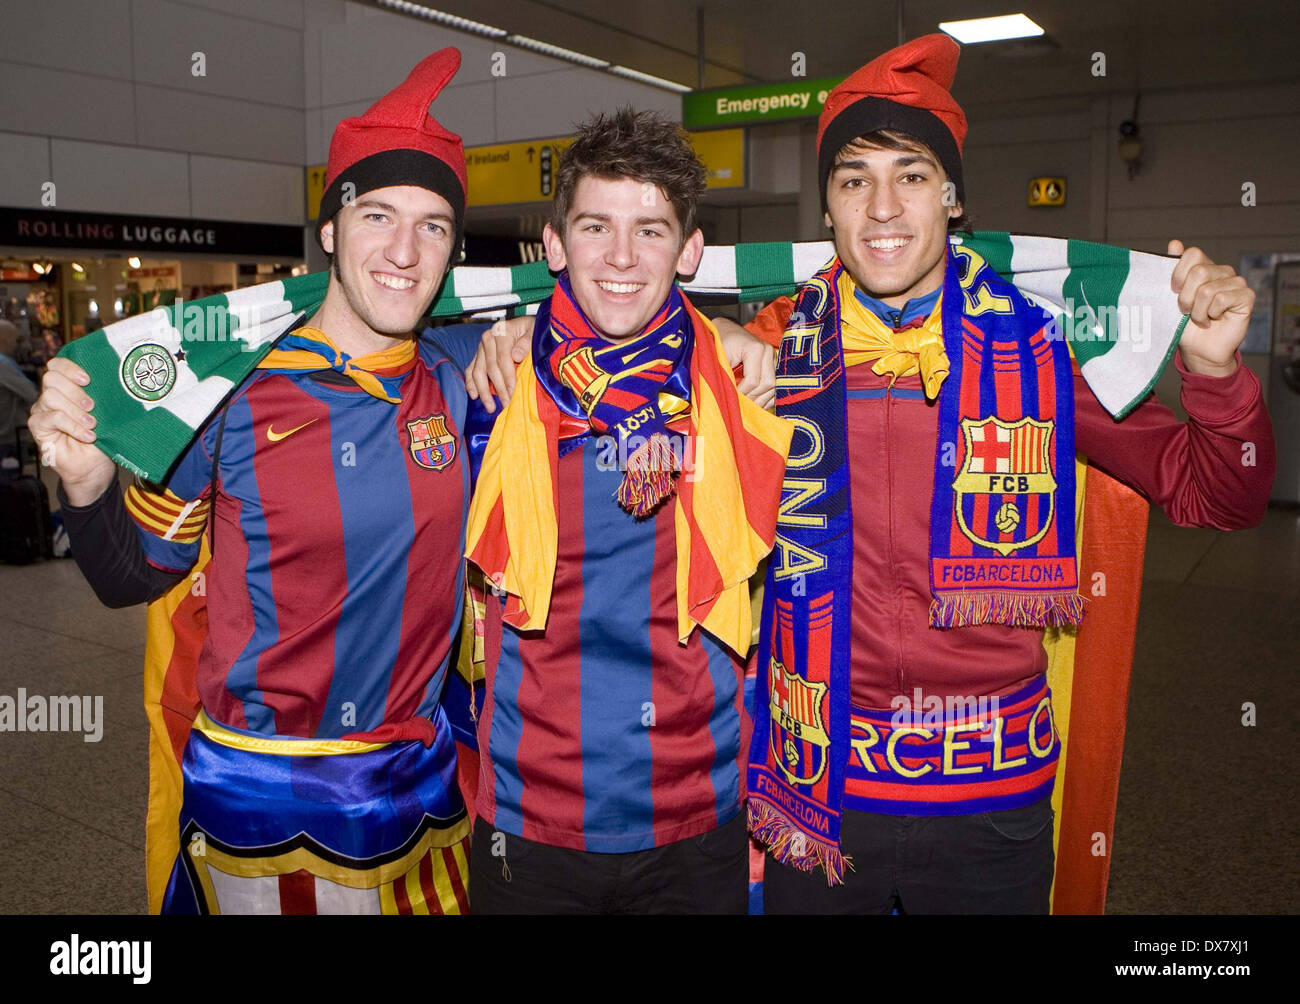 FC Barcelona await the team at Glasgow Airport Glasgow, Scotland - 06.11.12 Featuring: FC fans await the team at Glasgow Airport When: 06 Nov Stock Photo - Alamy